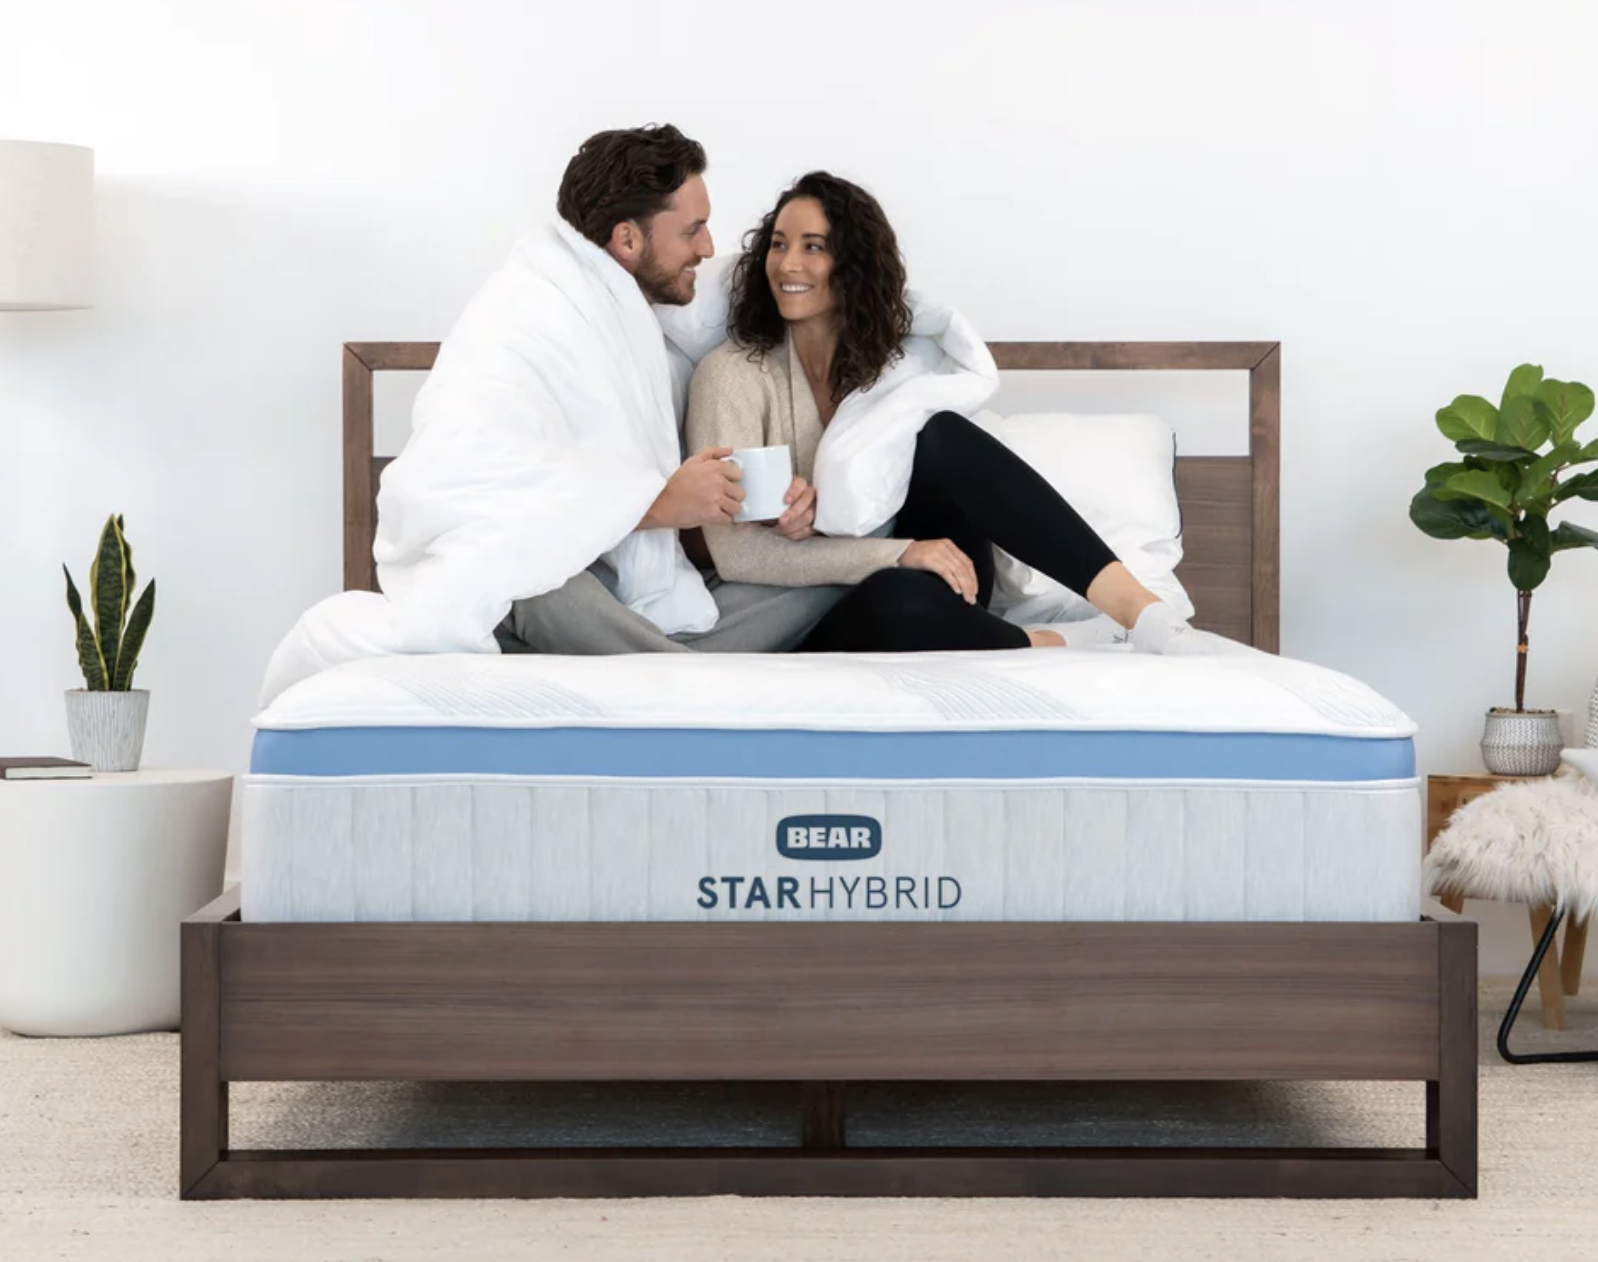 Two people snuggle on a mattress